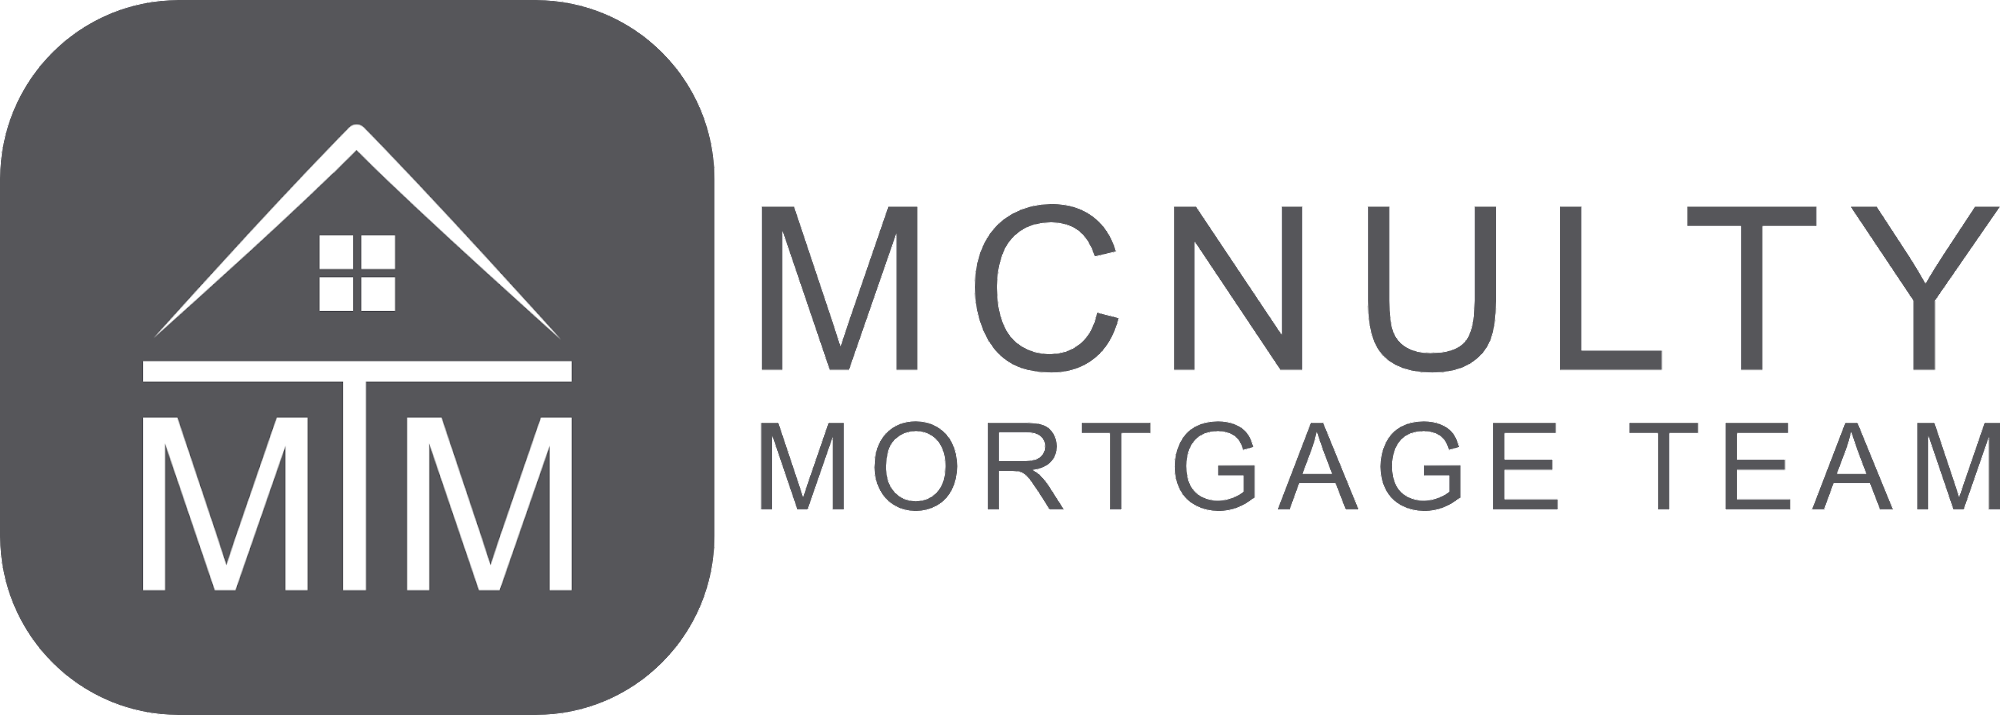 Connor McNulty Mortgage Team